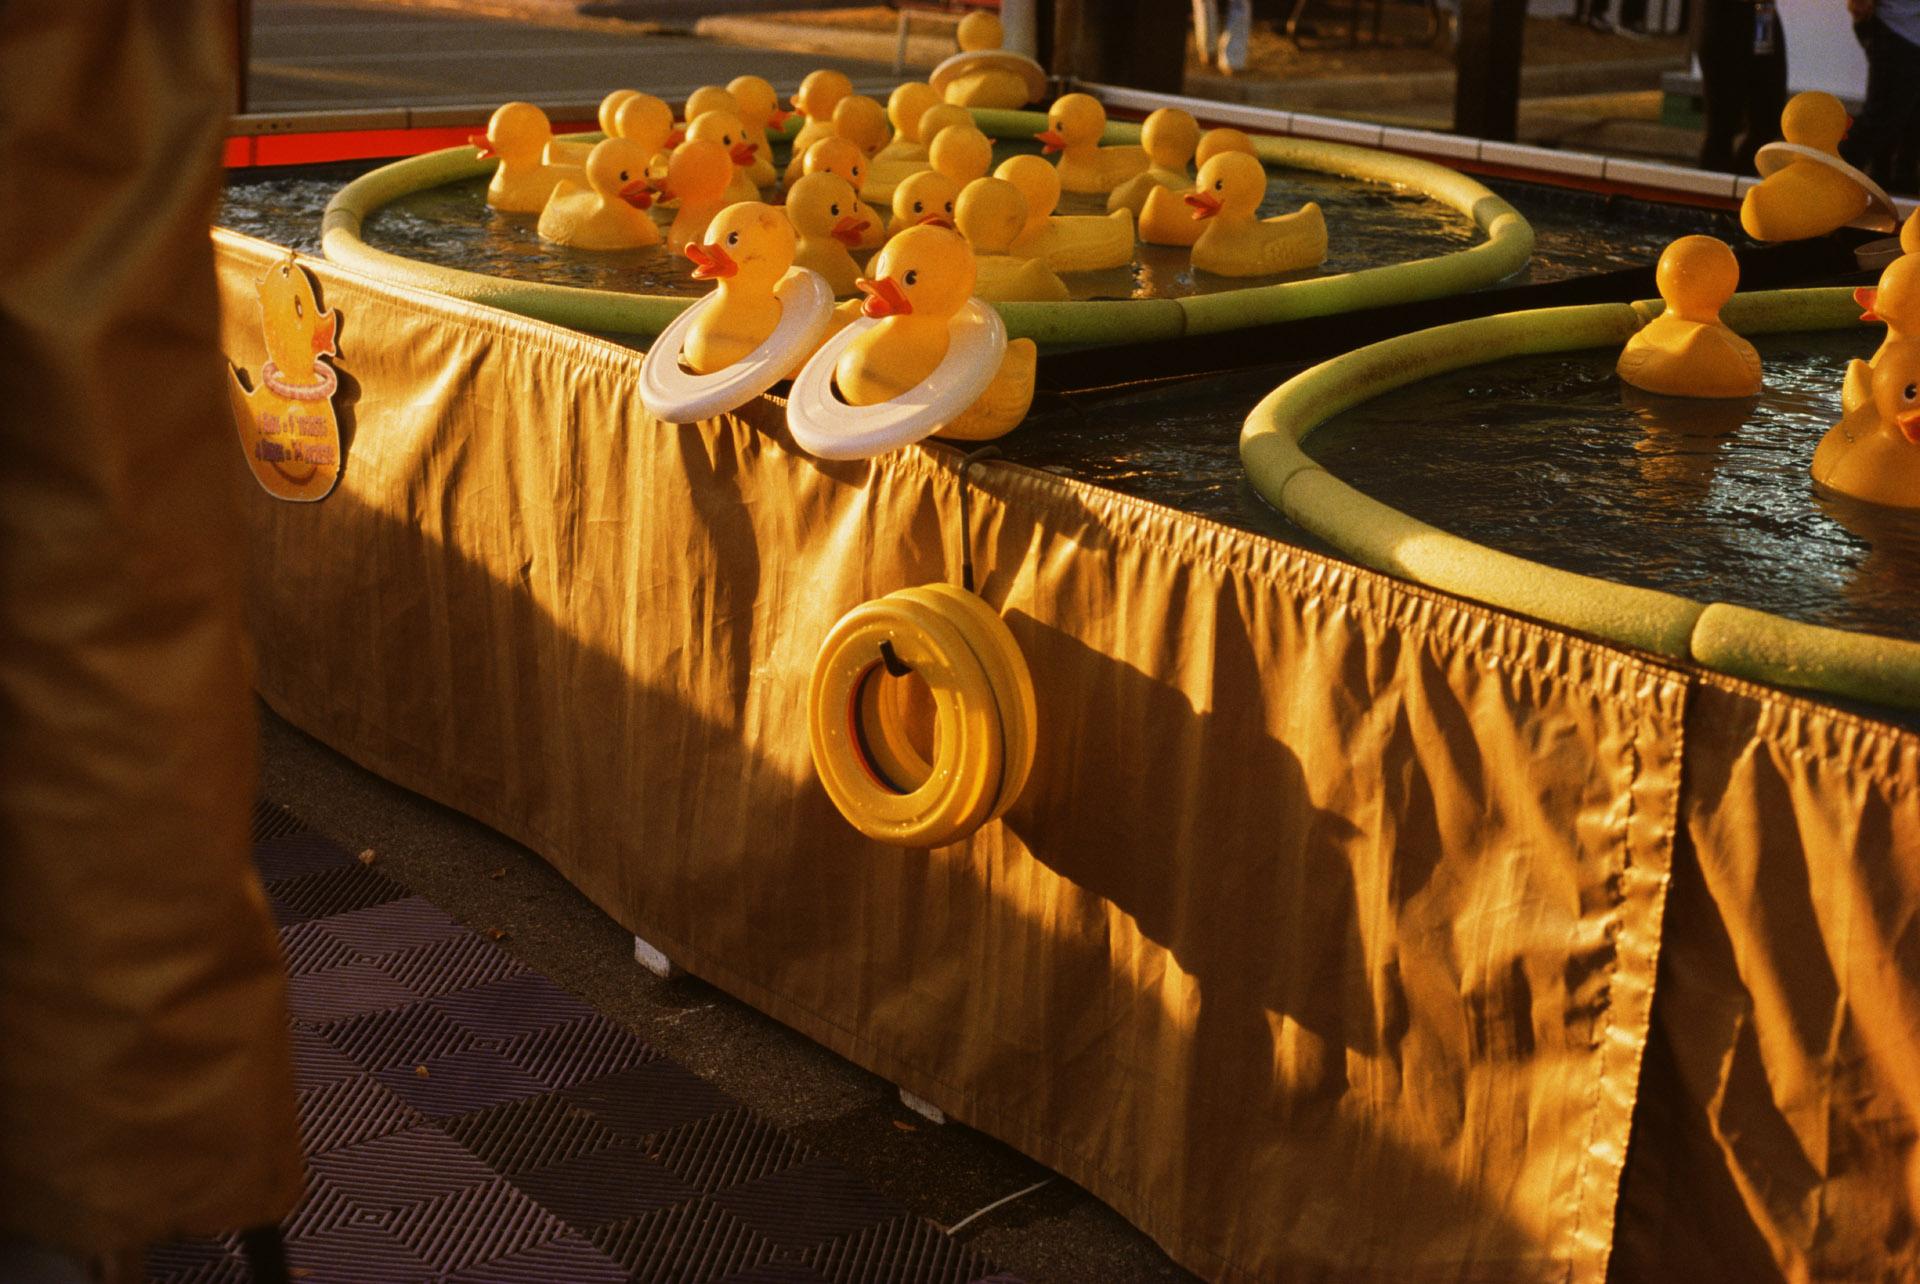 Mickey Aloisio Color Photograph - Untitled (Rubber Duckies)